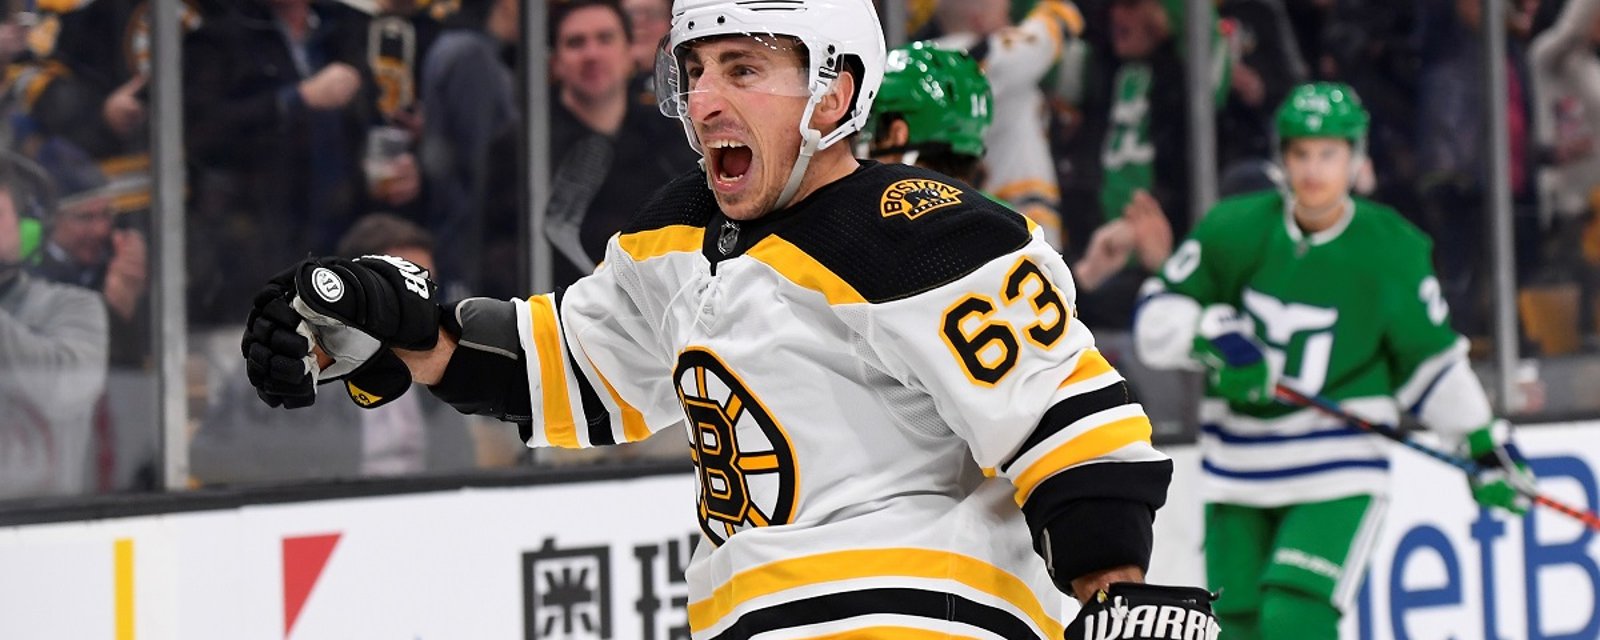 Big updates on Brad Marchand and David Backes ahead of rematch against the Habs.